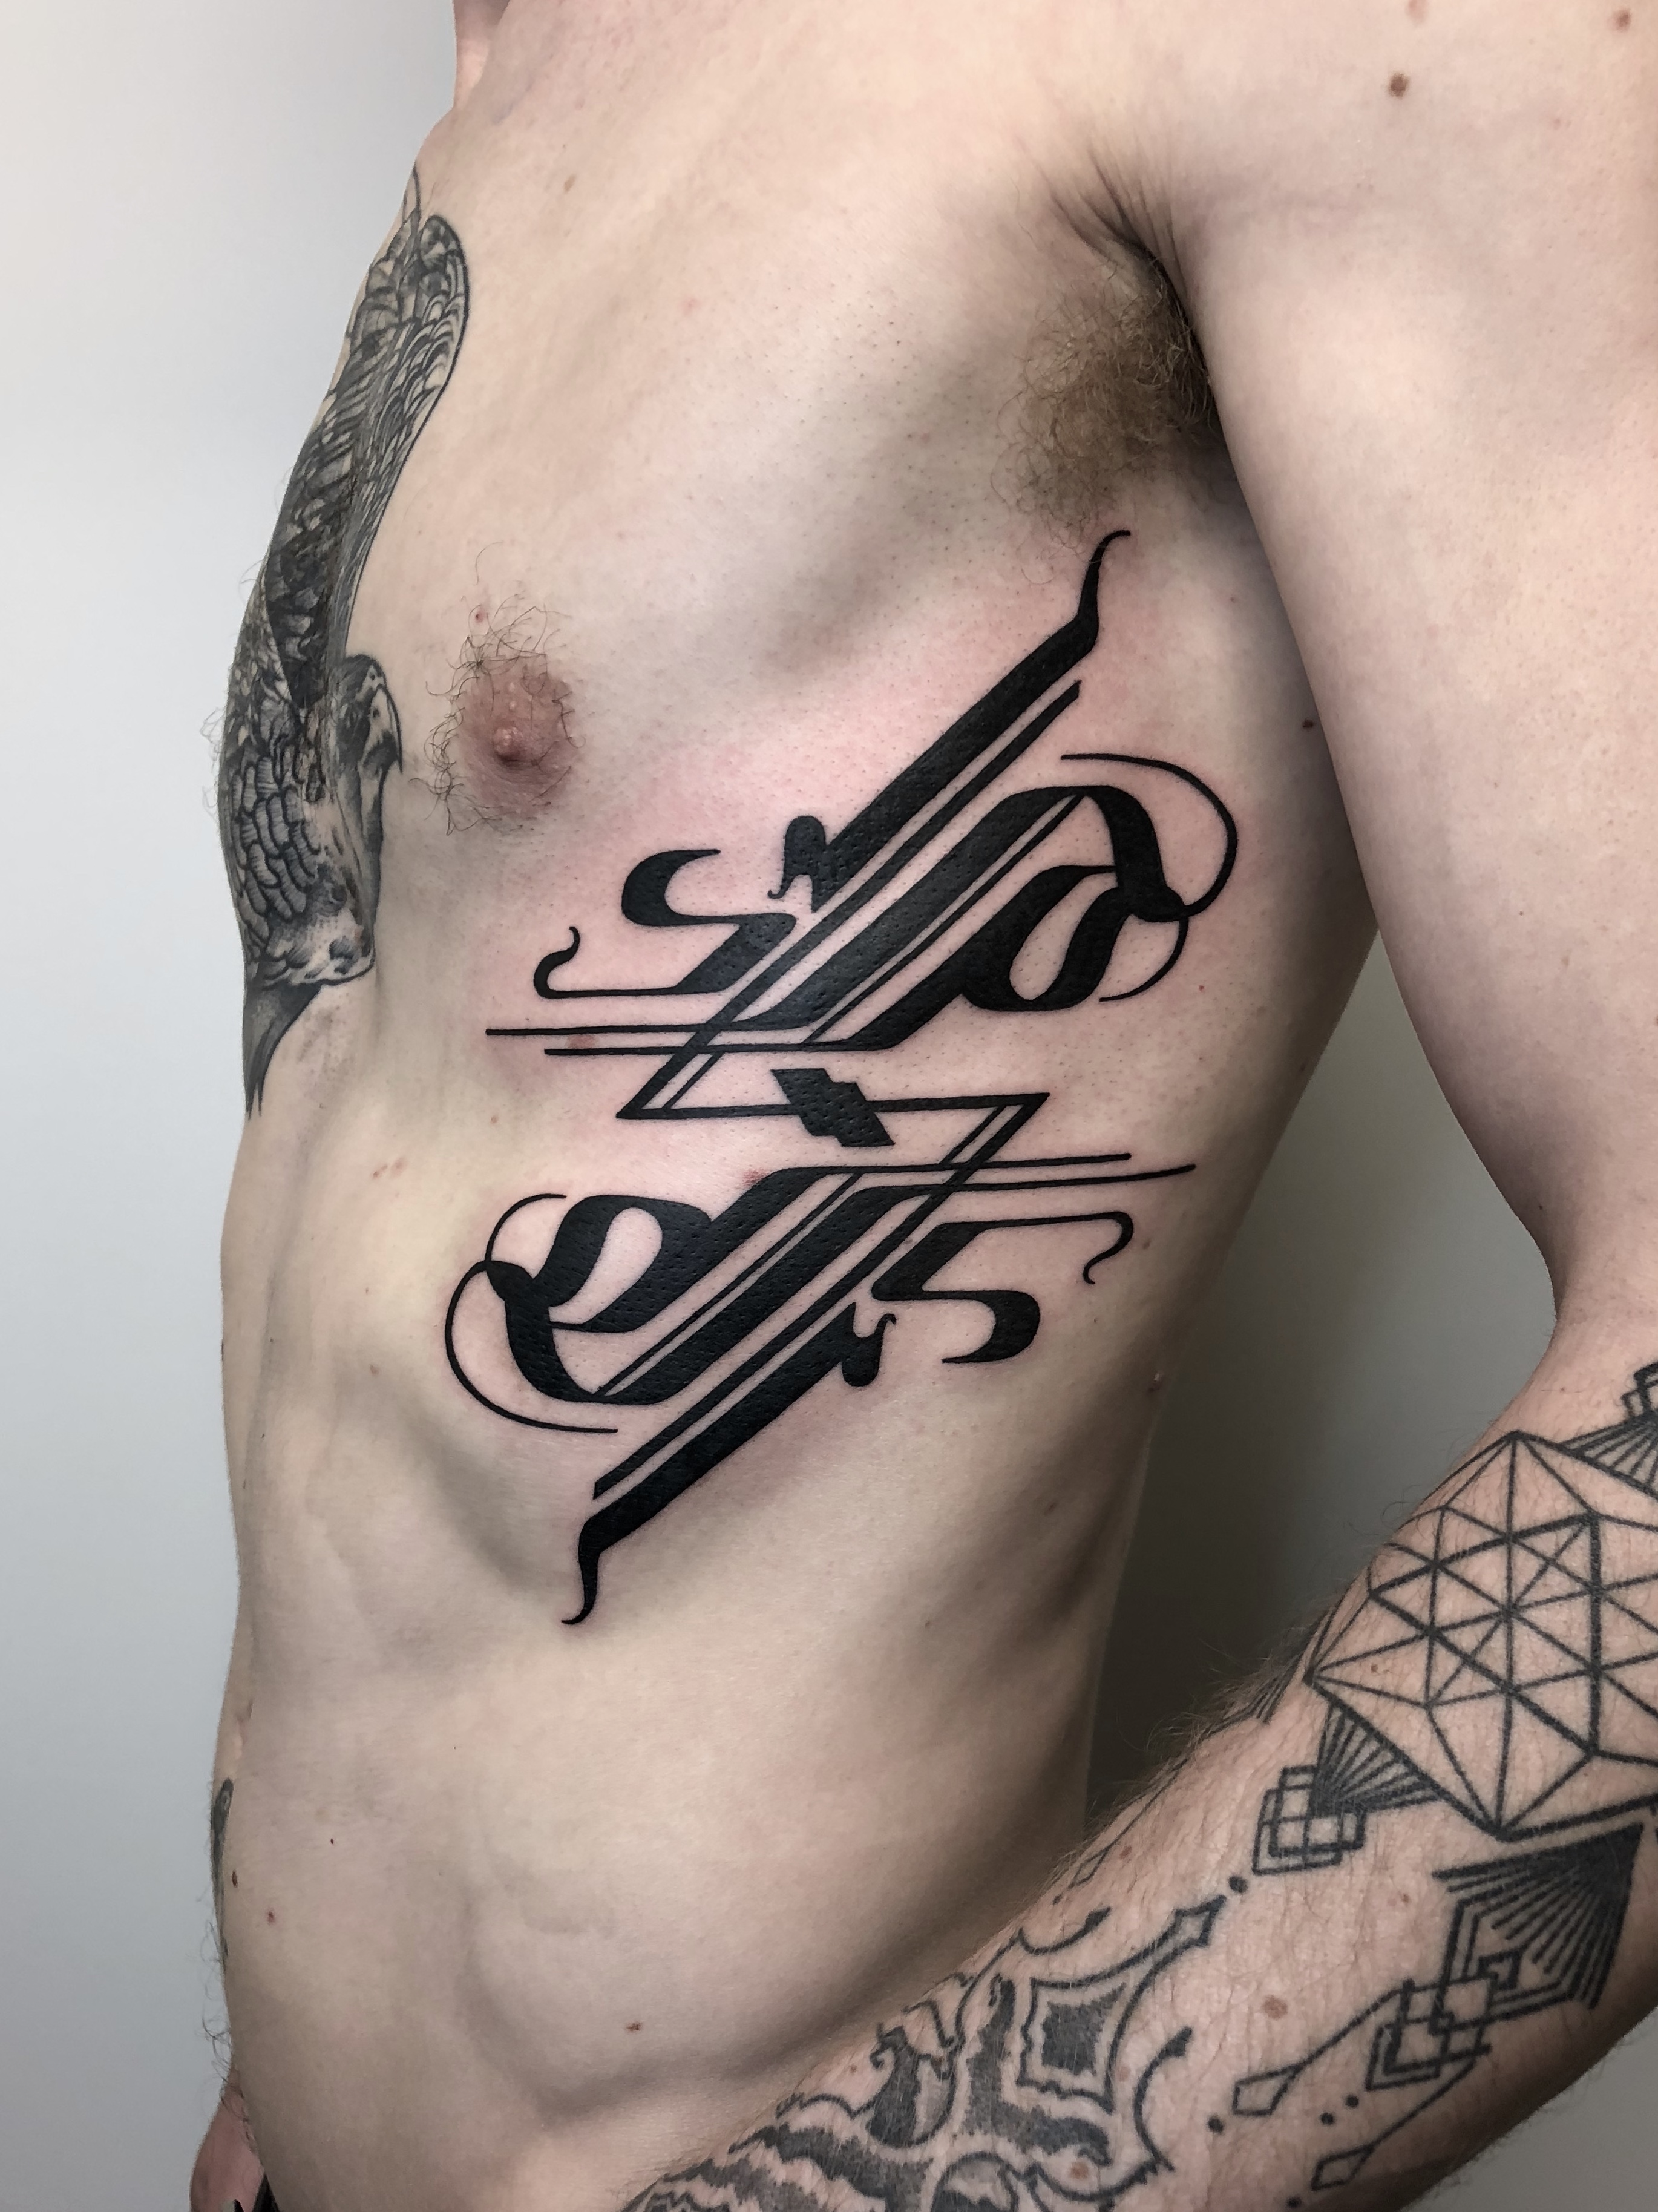 The 7 Most Painful Places to Get a Tattoo